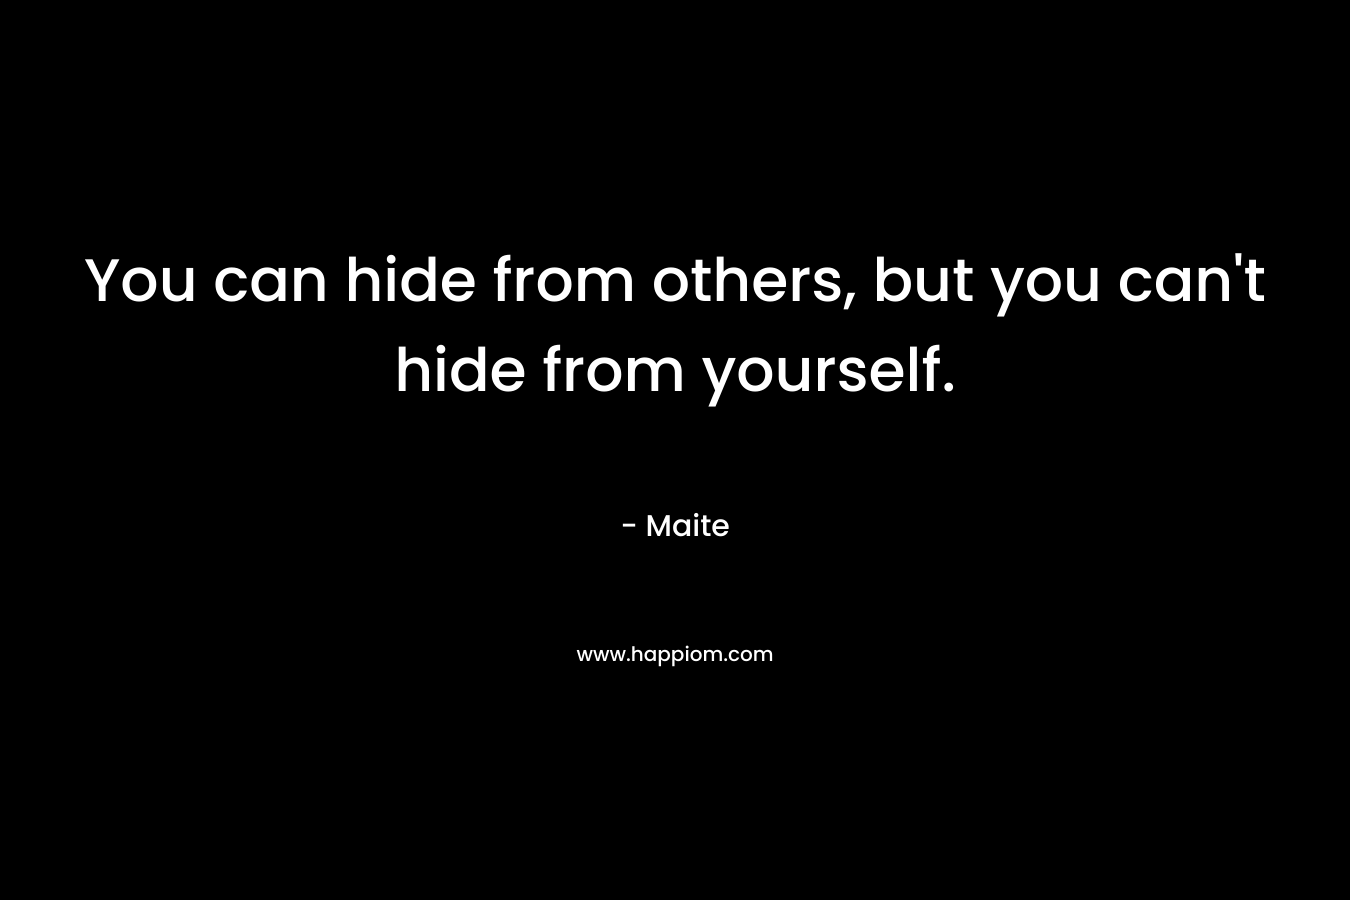 You can hide from others, but you can't hide from yourself.